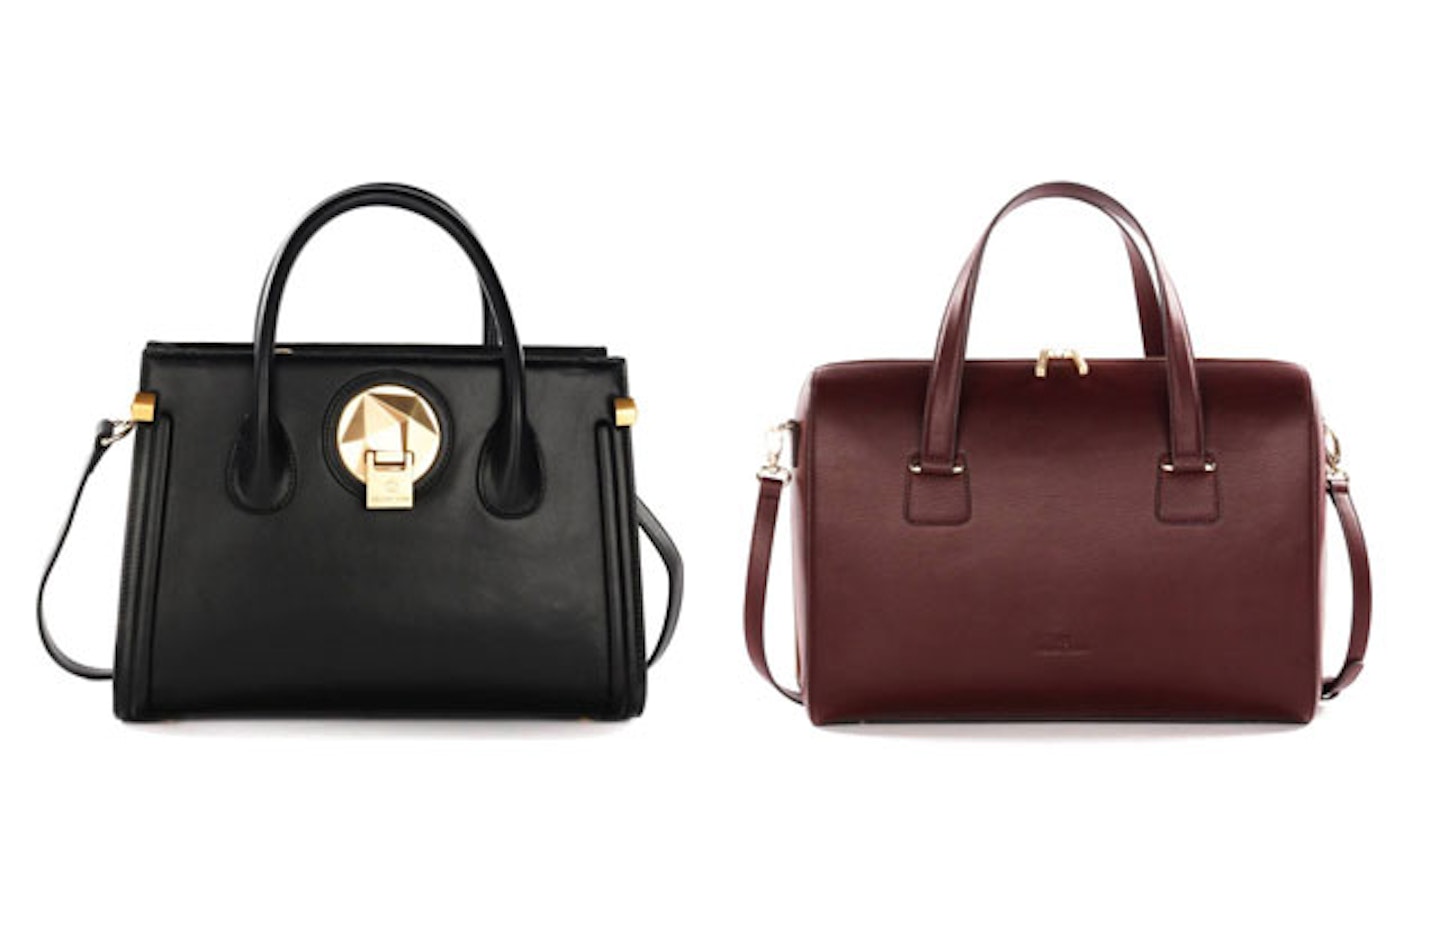 Céline Dion Launches Her Own Line of Handbags